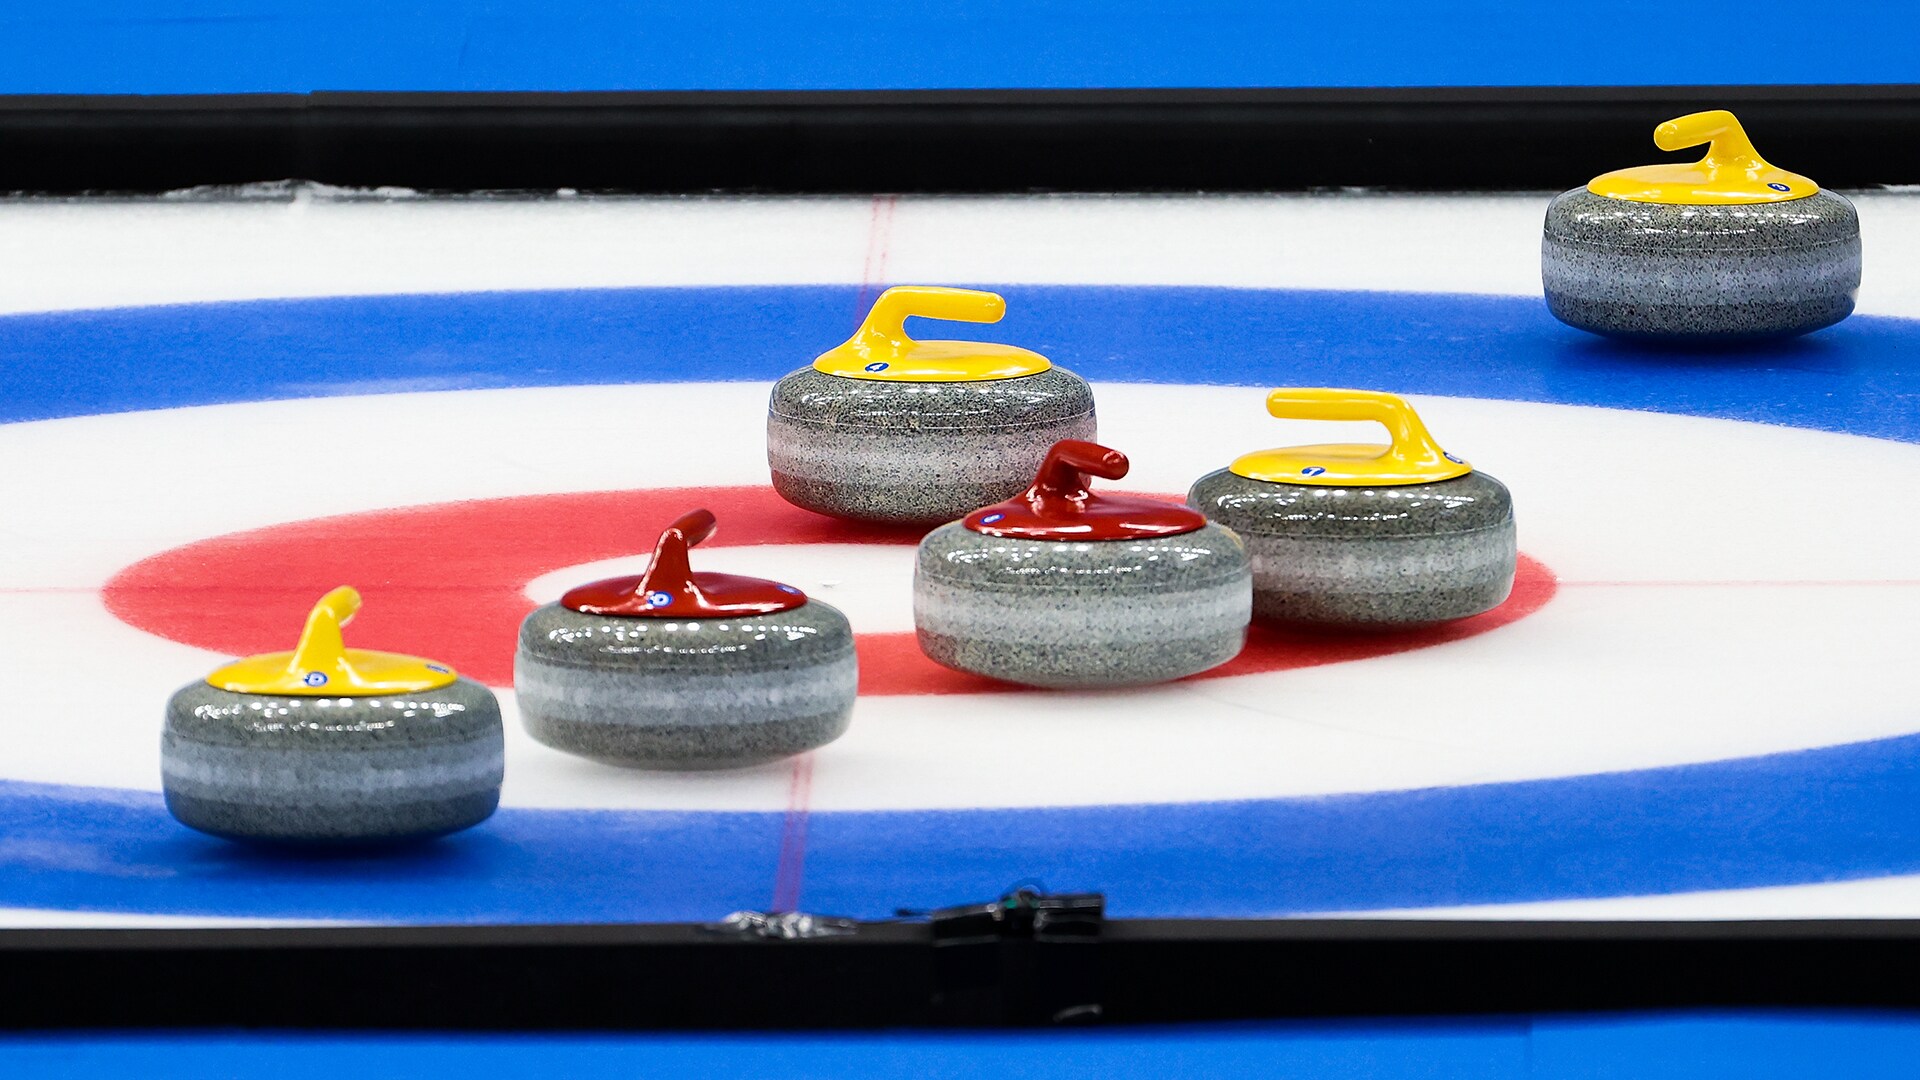 Here are Some Fun Facts About the History of the Sport of Curling